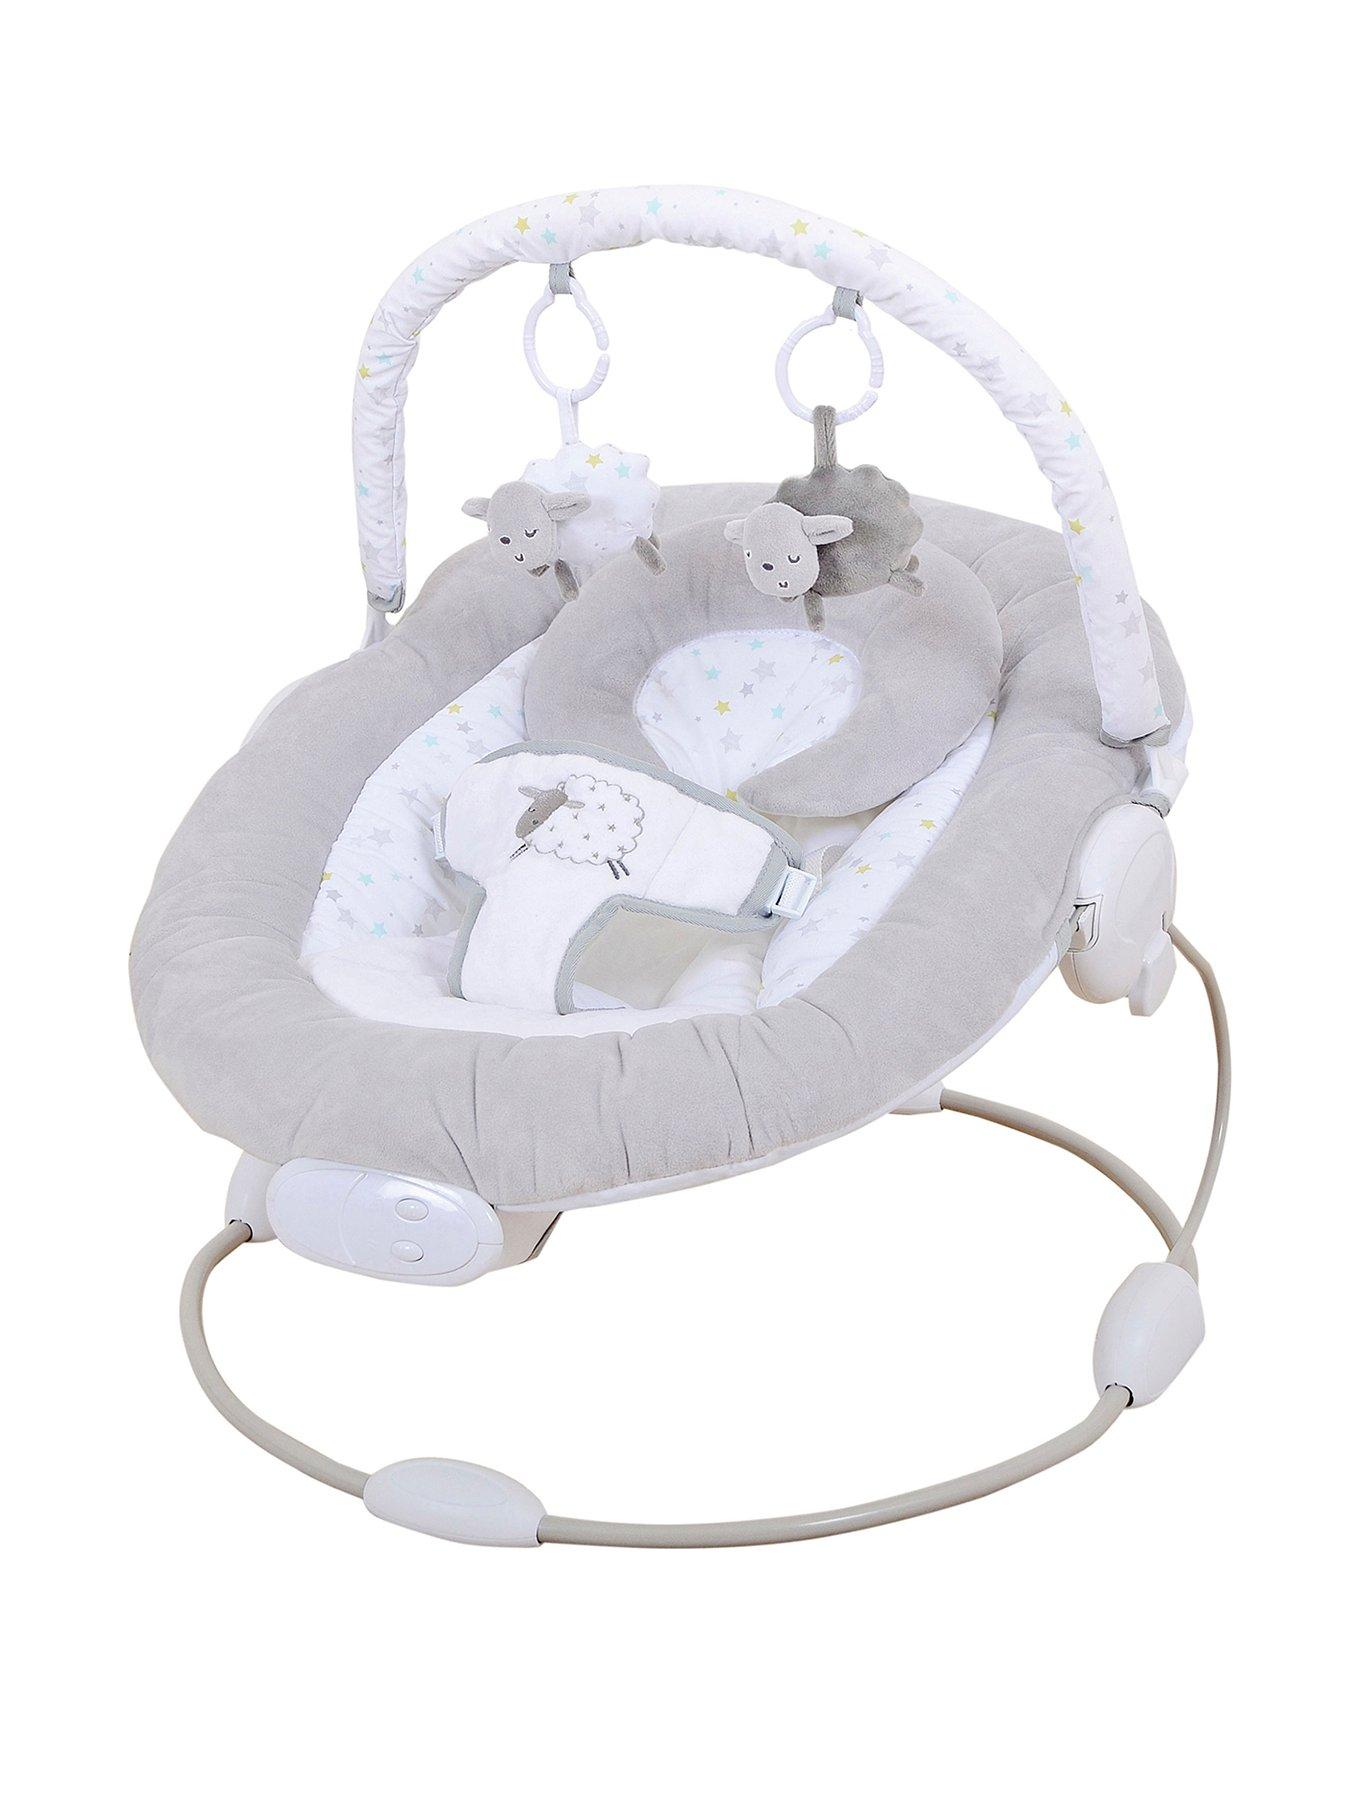 grey and pink baby bouncer